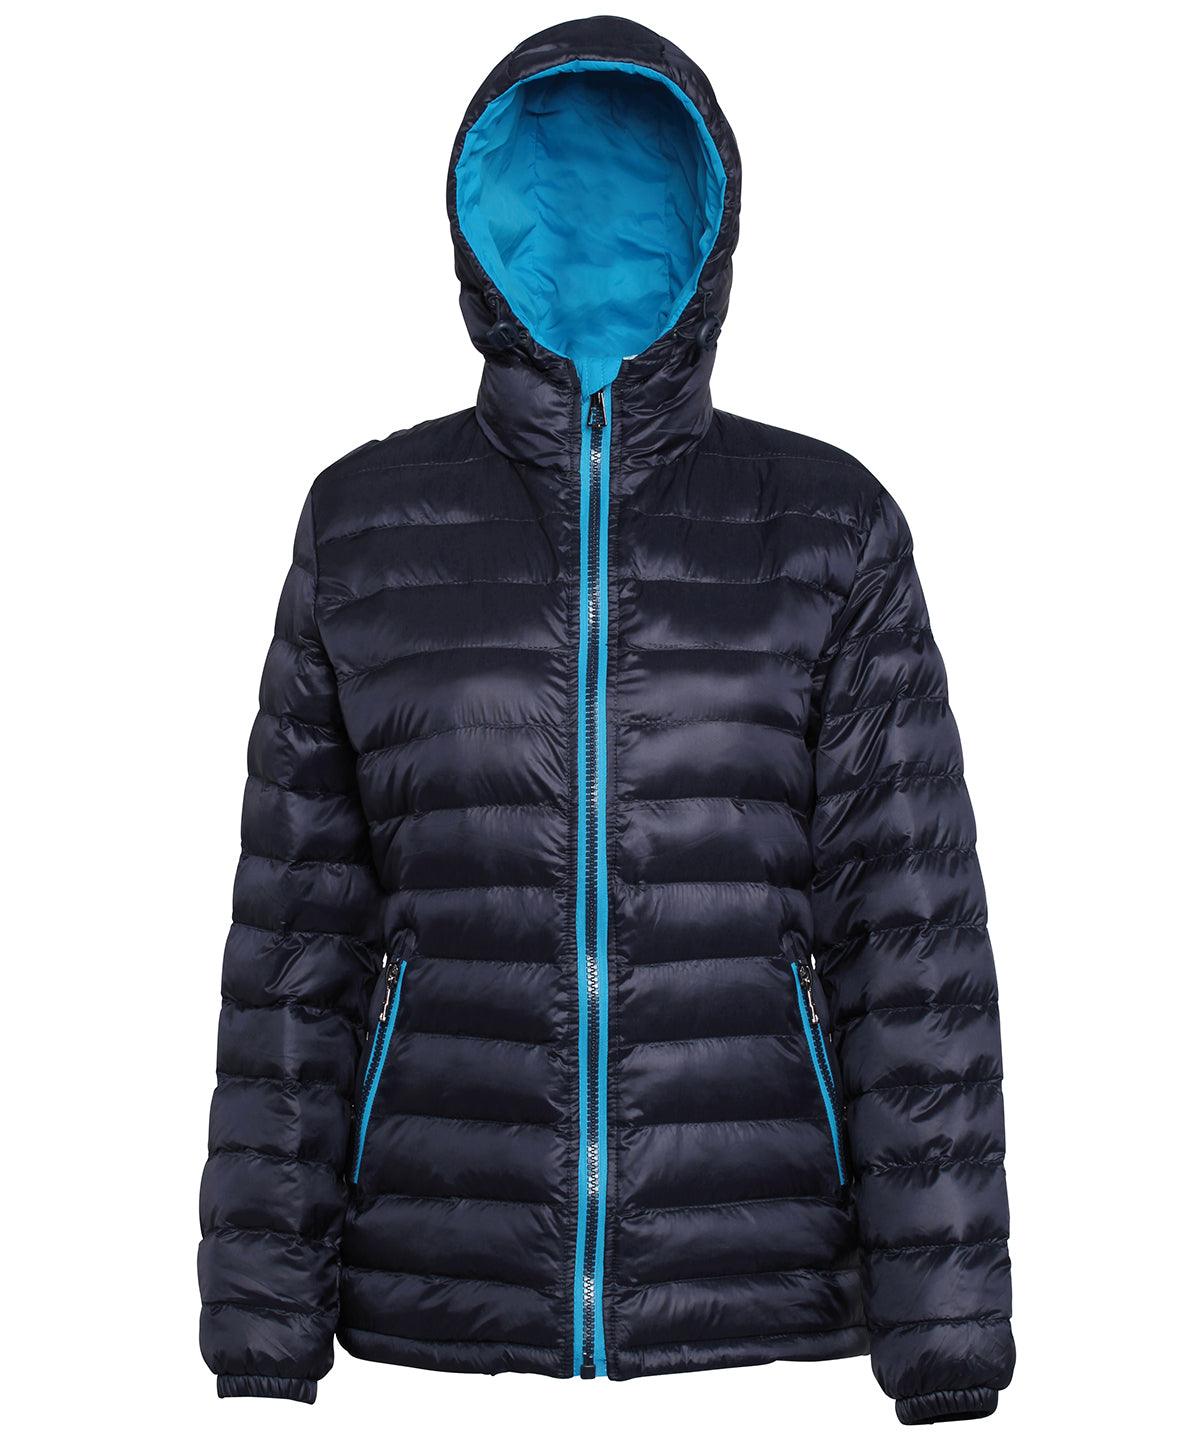 Navy/Sapphire - Women's padded jacket Jackets 2786 Jackets & Coats, Must Haves, Padded & Insulation Schoolwear Centres